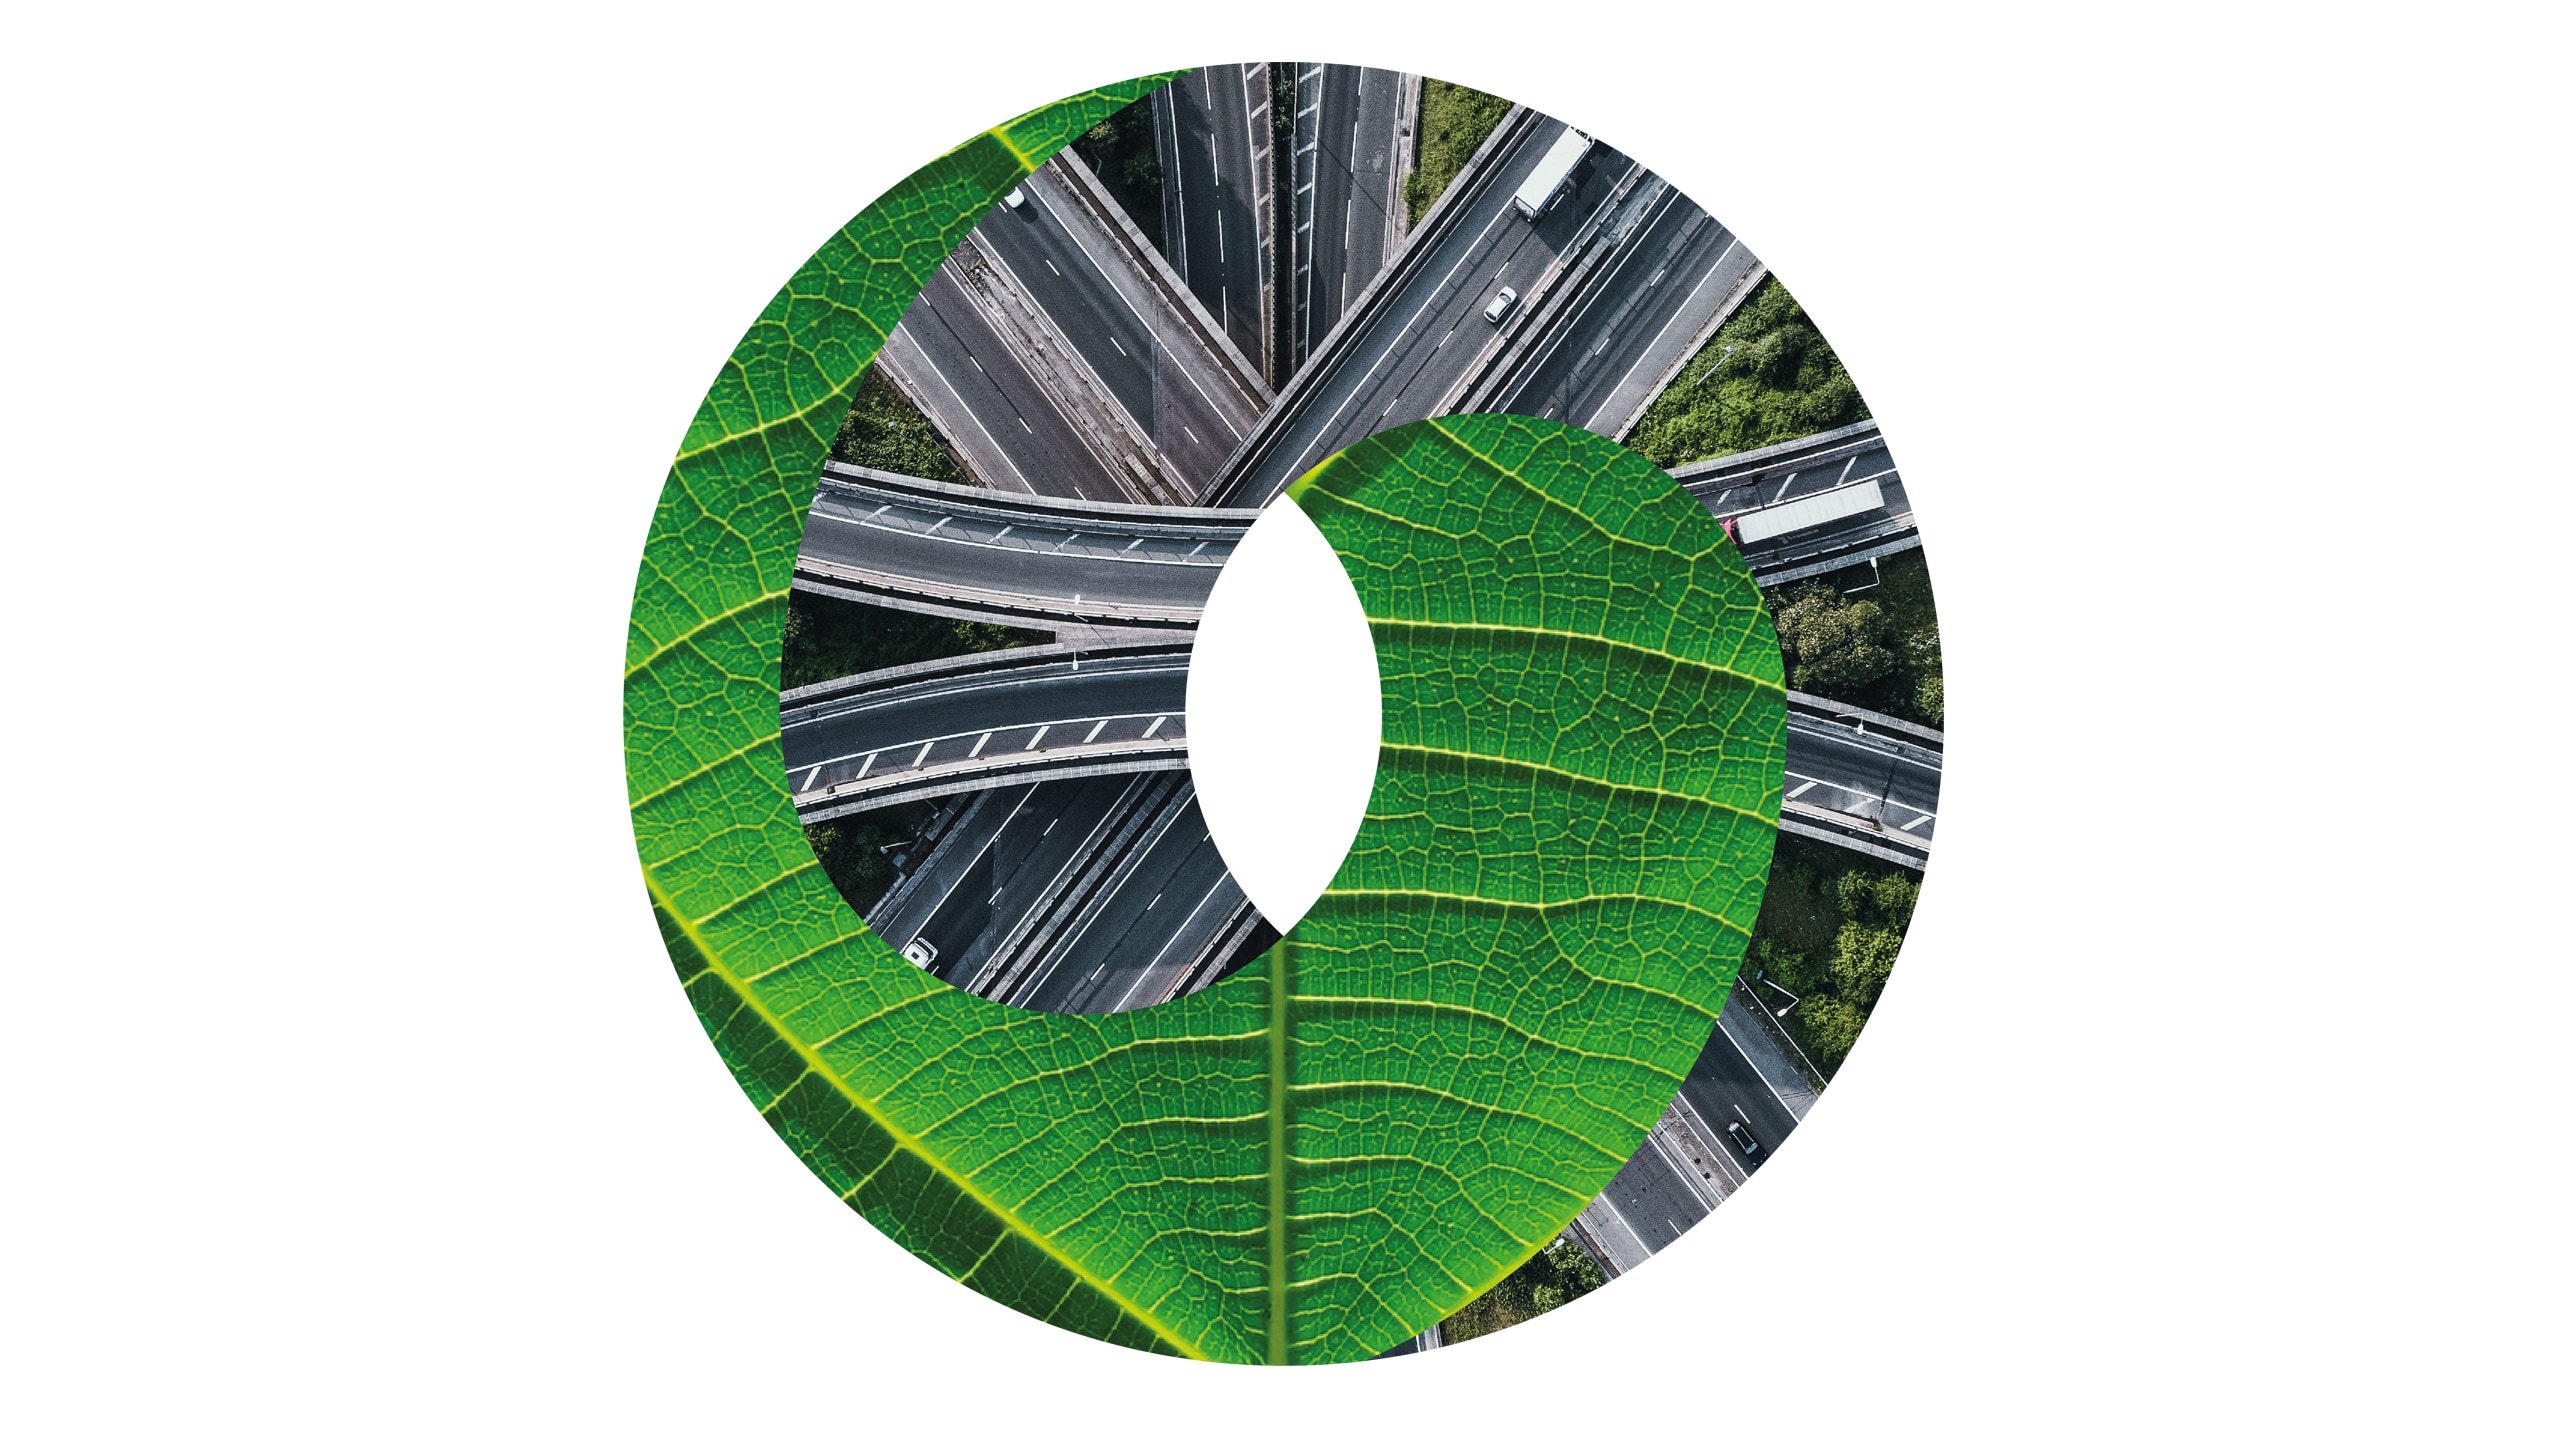 Sustainable value system abstract hero image of freeway interwoven with leaf veins